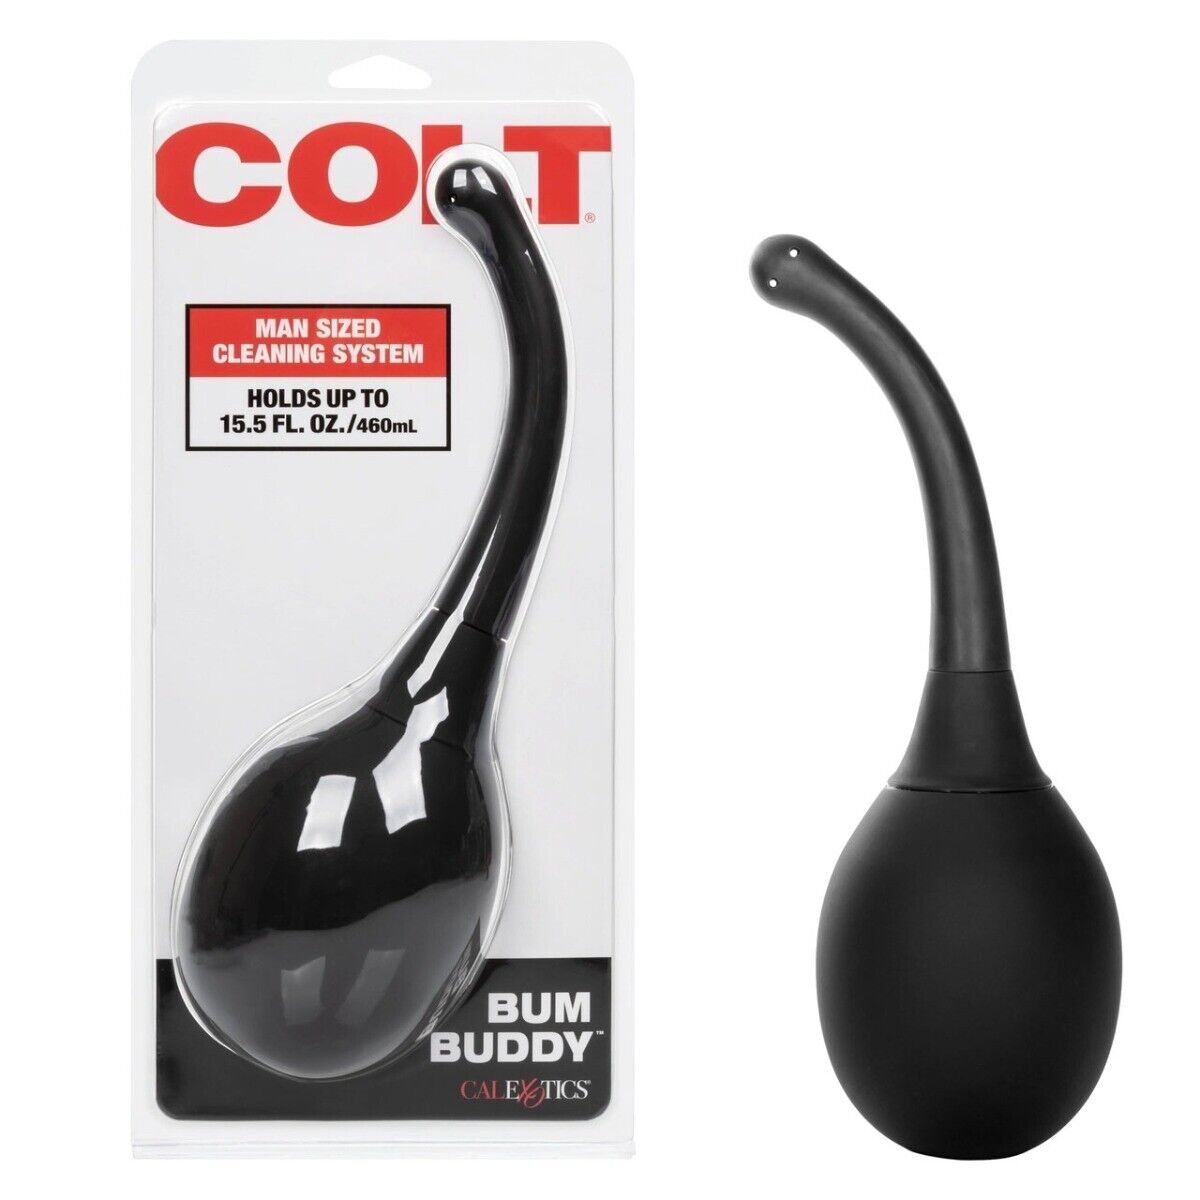 Silicone Colt Bum Buddy Man Sized Cleaning System Douche Hold 15.5oz Liquid